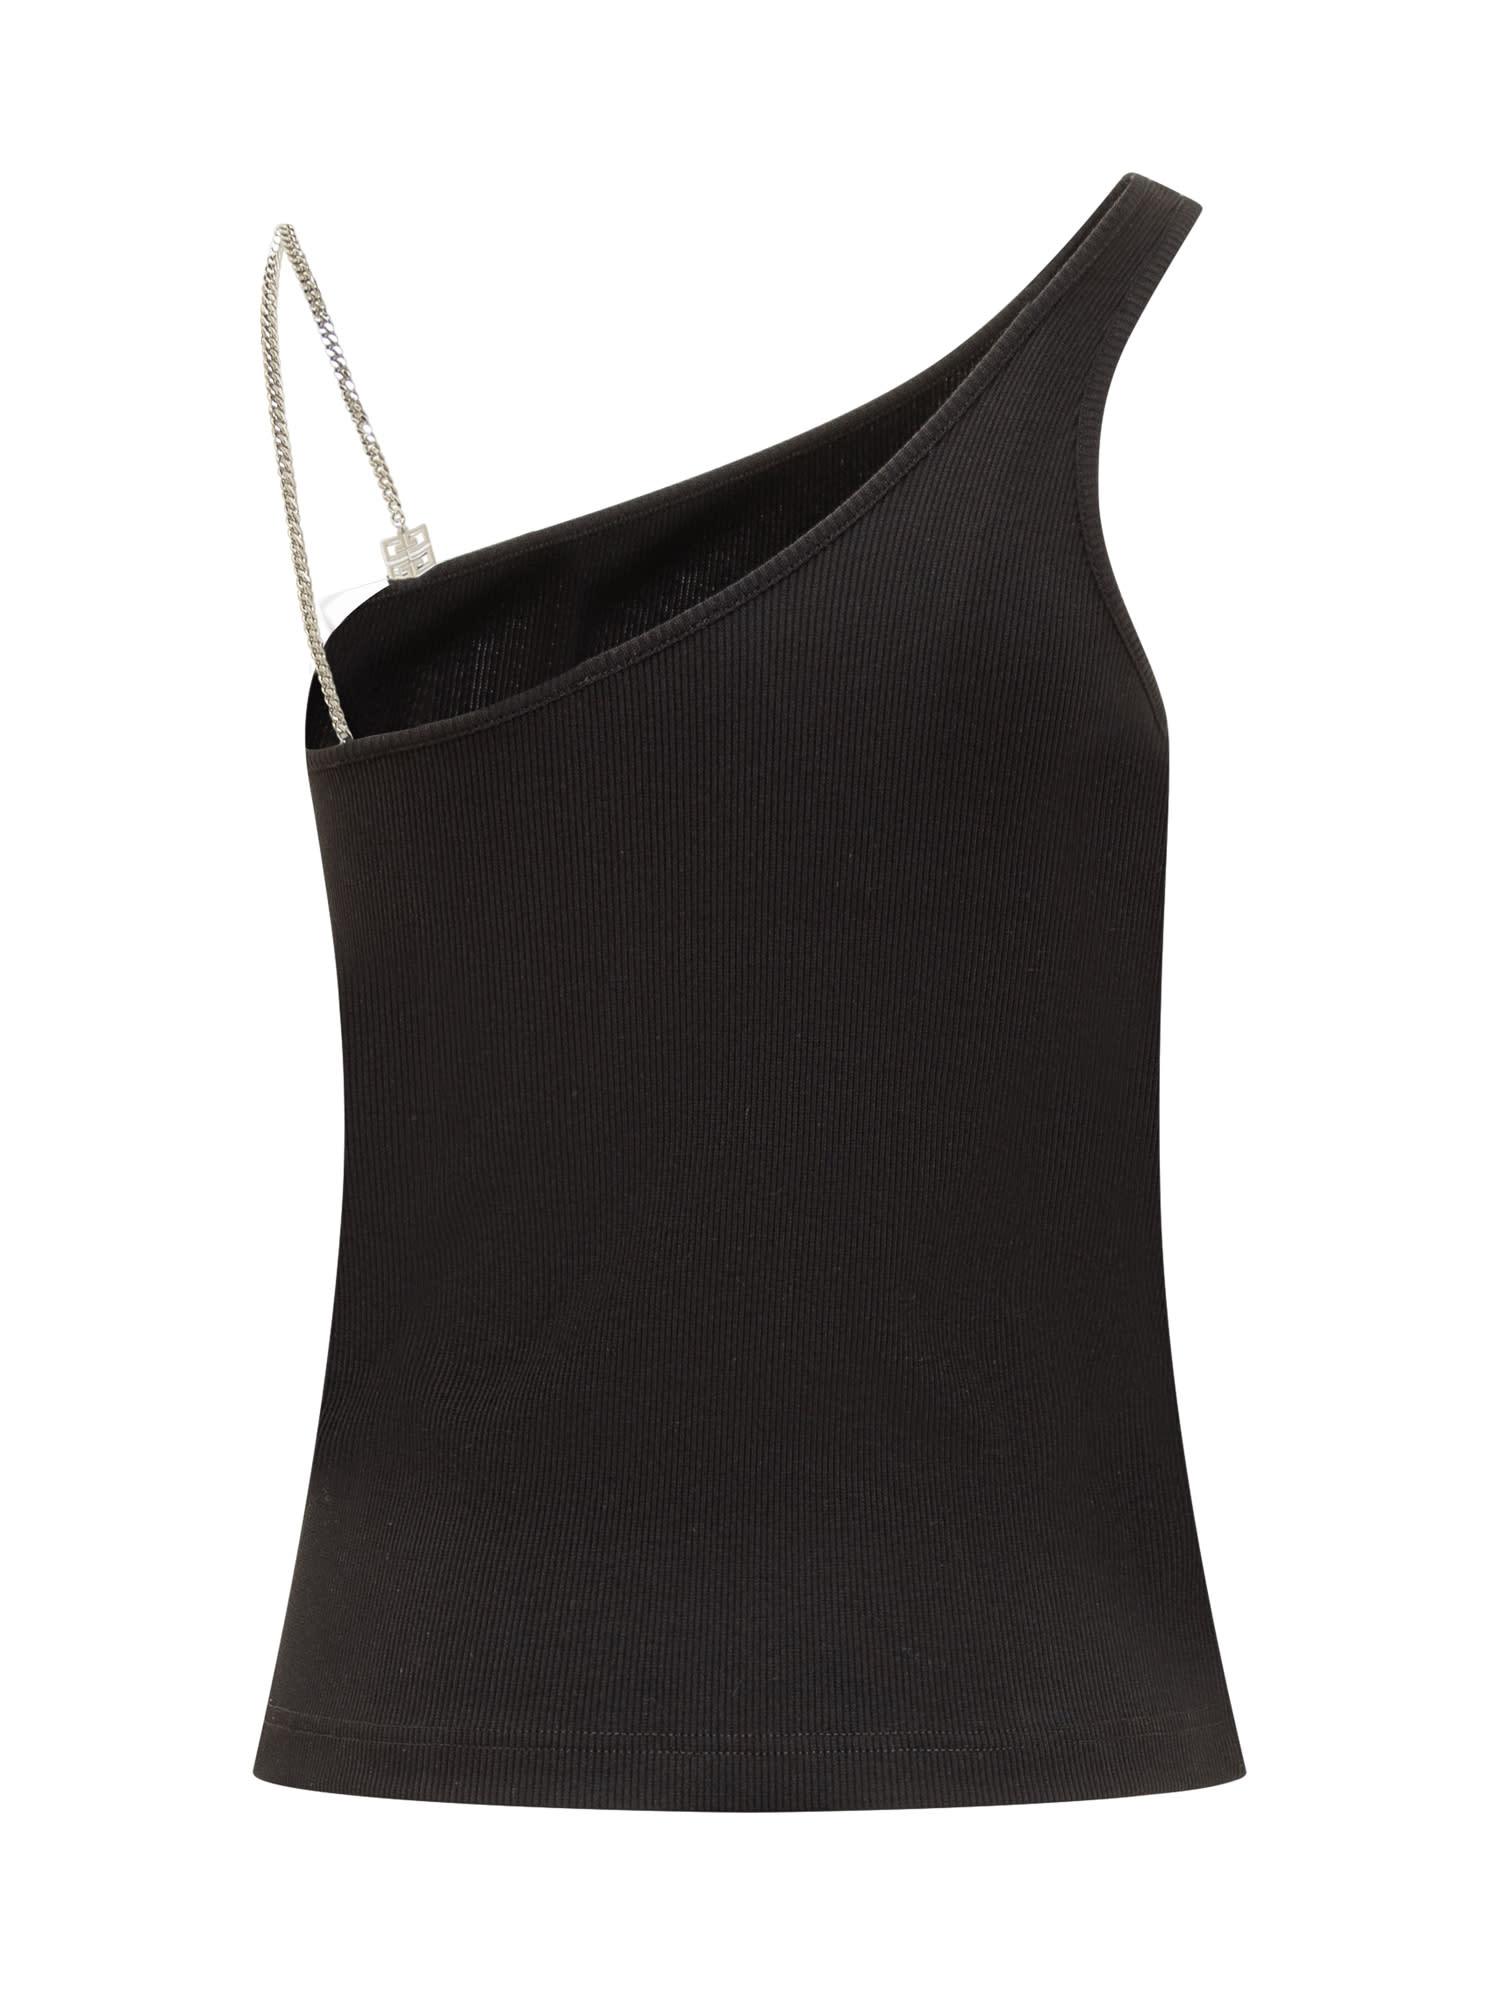 Givenchy Asymmetrical Cotton Top With Chain in Black